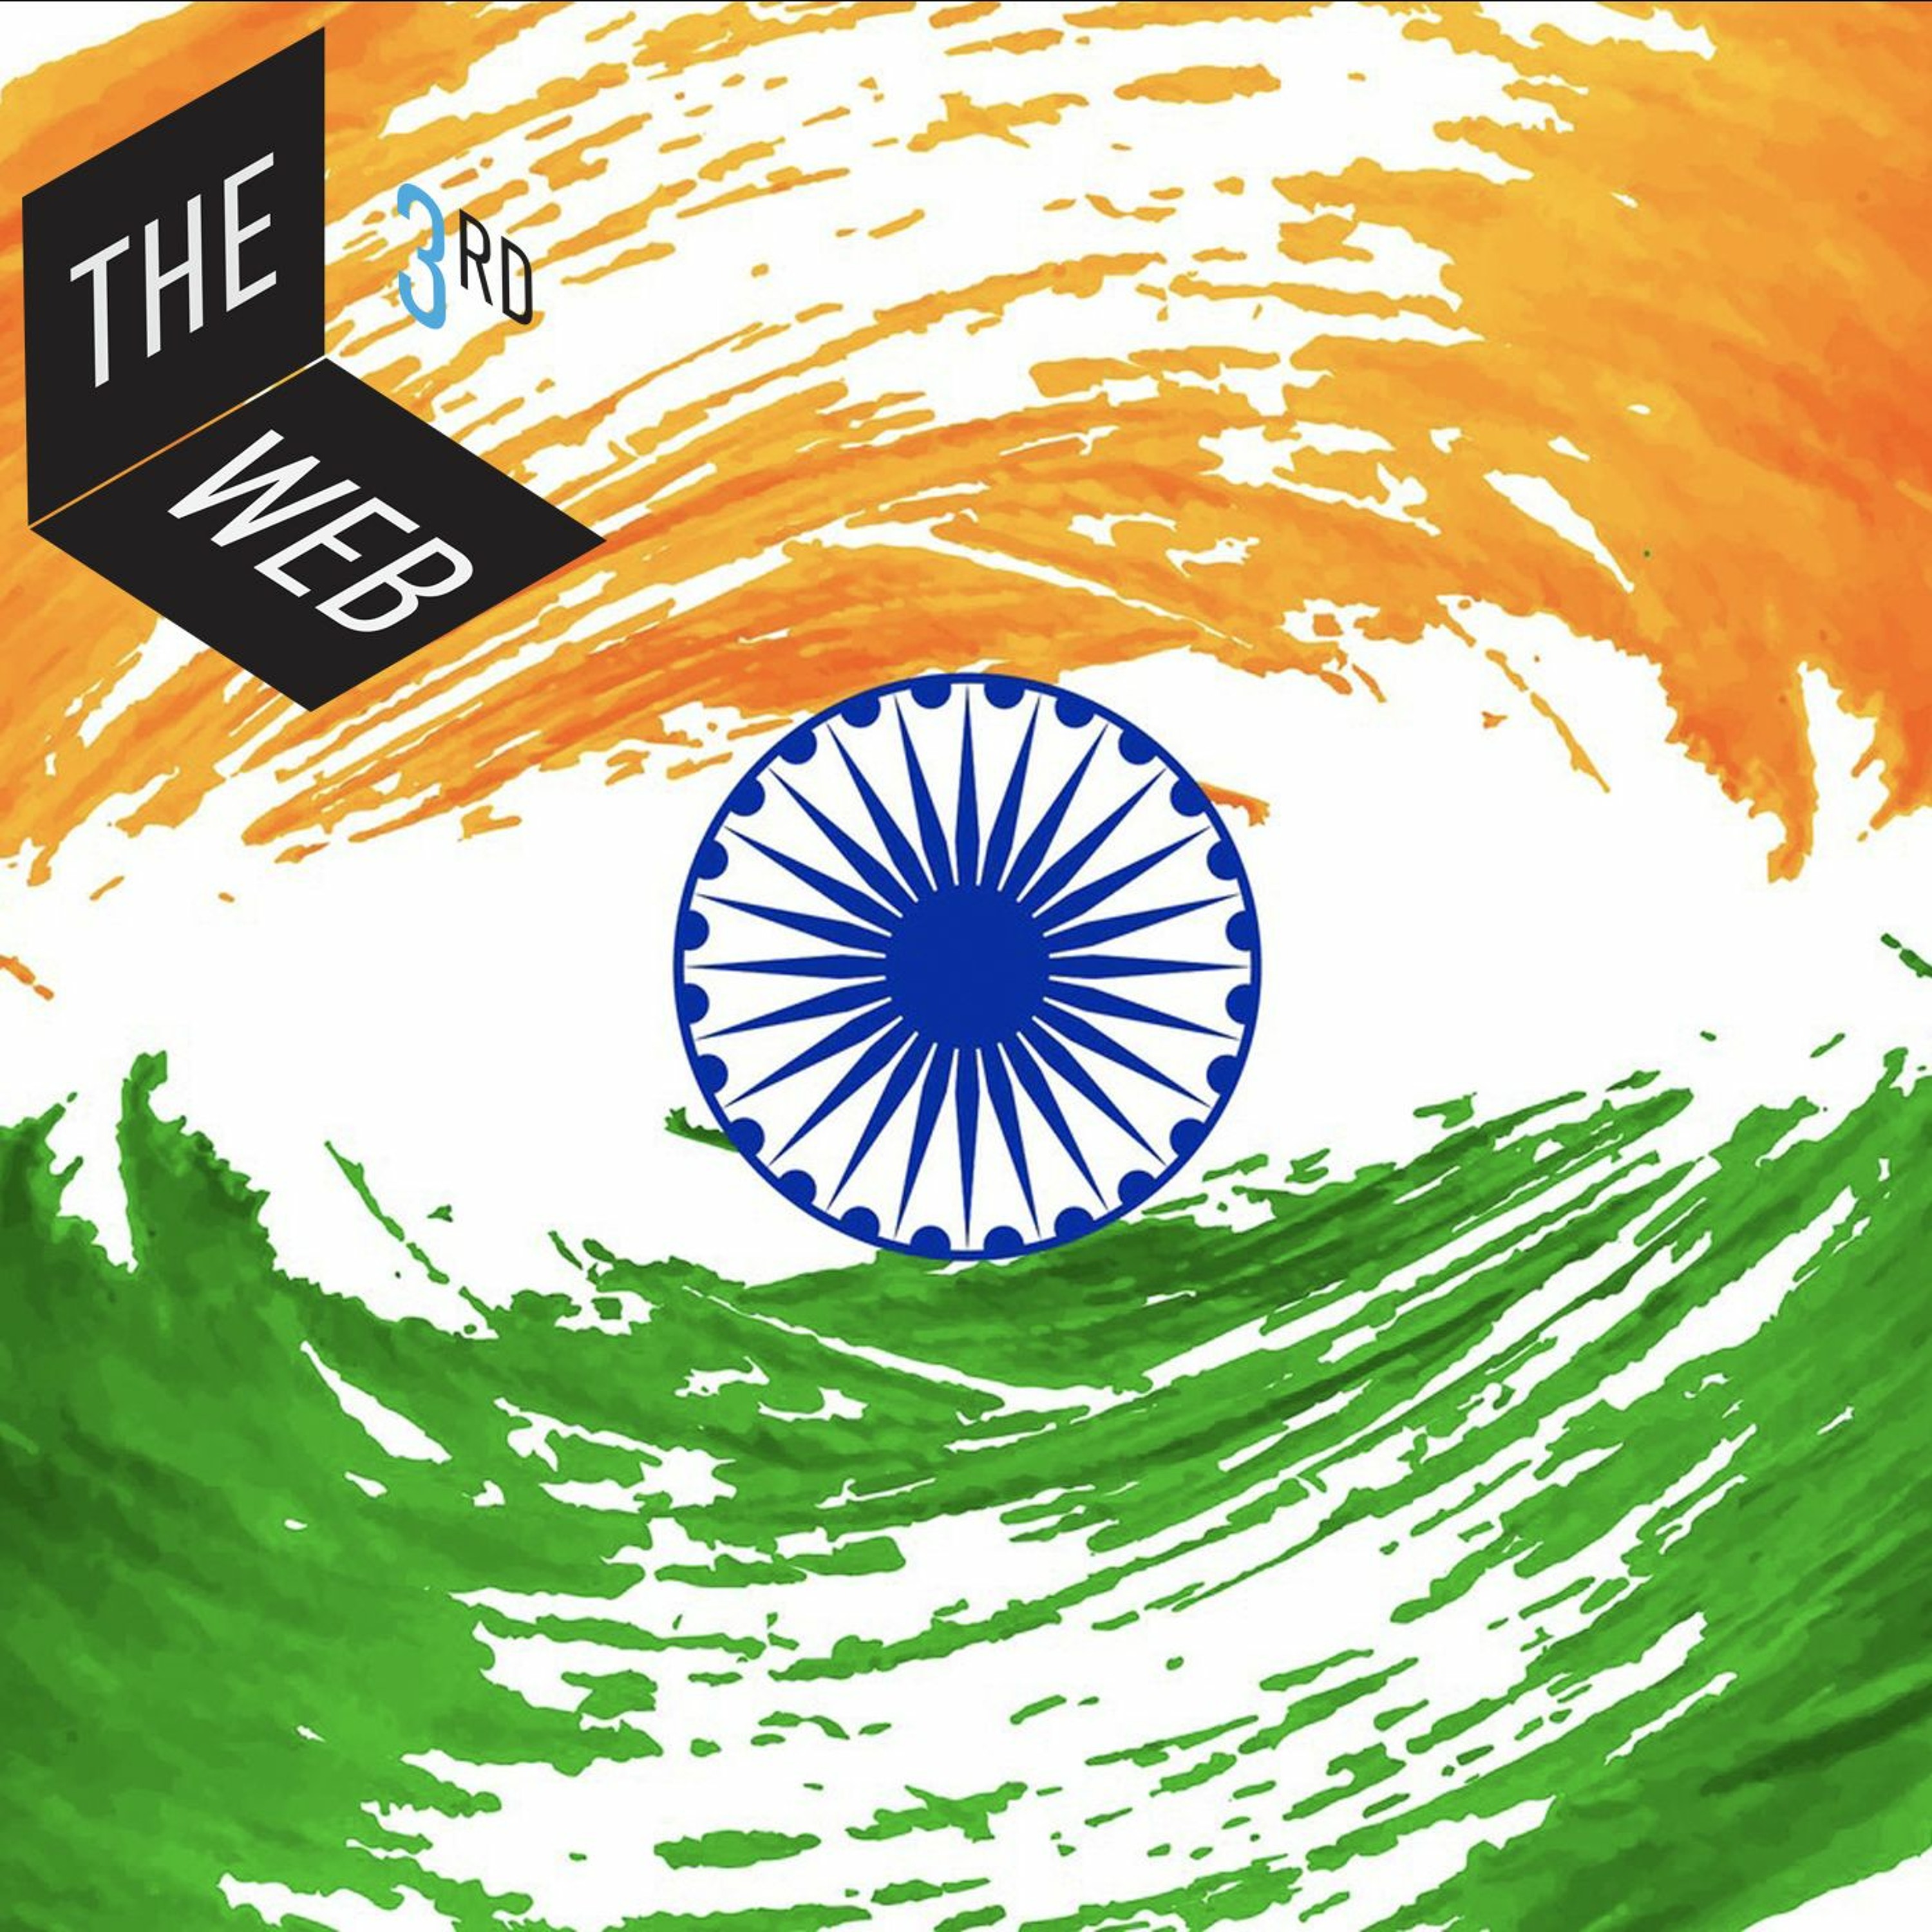 The Third Web #10 - An Emerging India